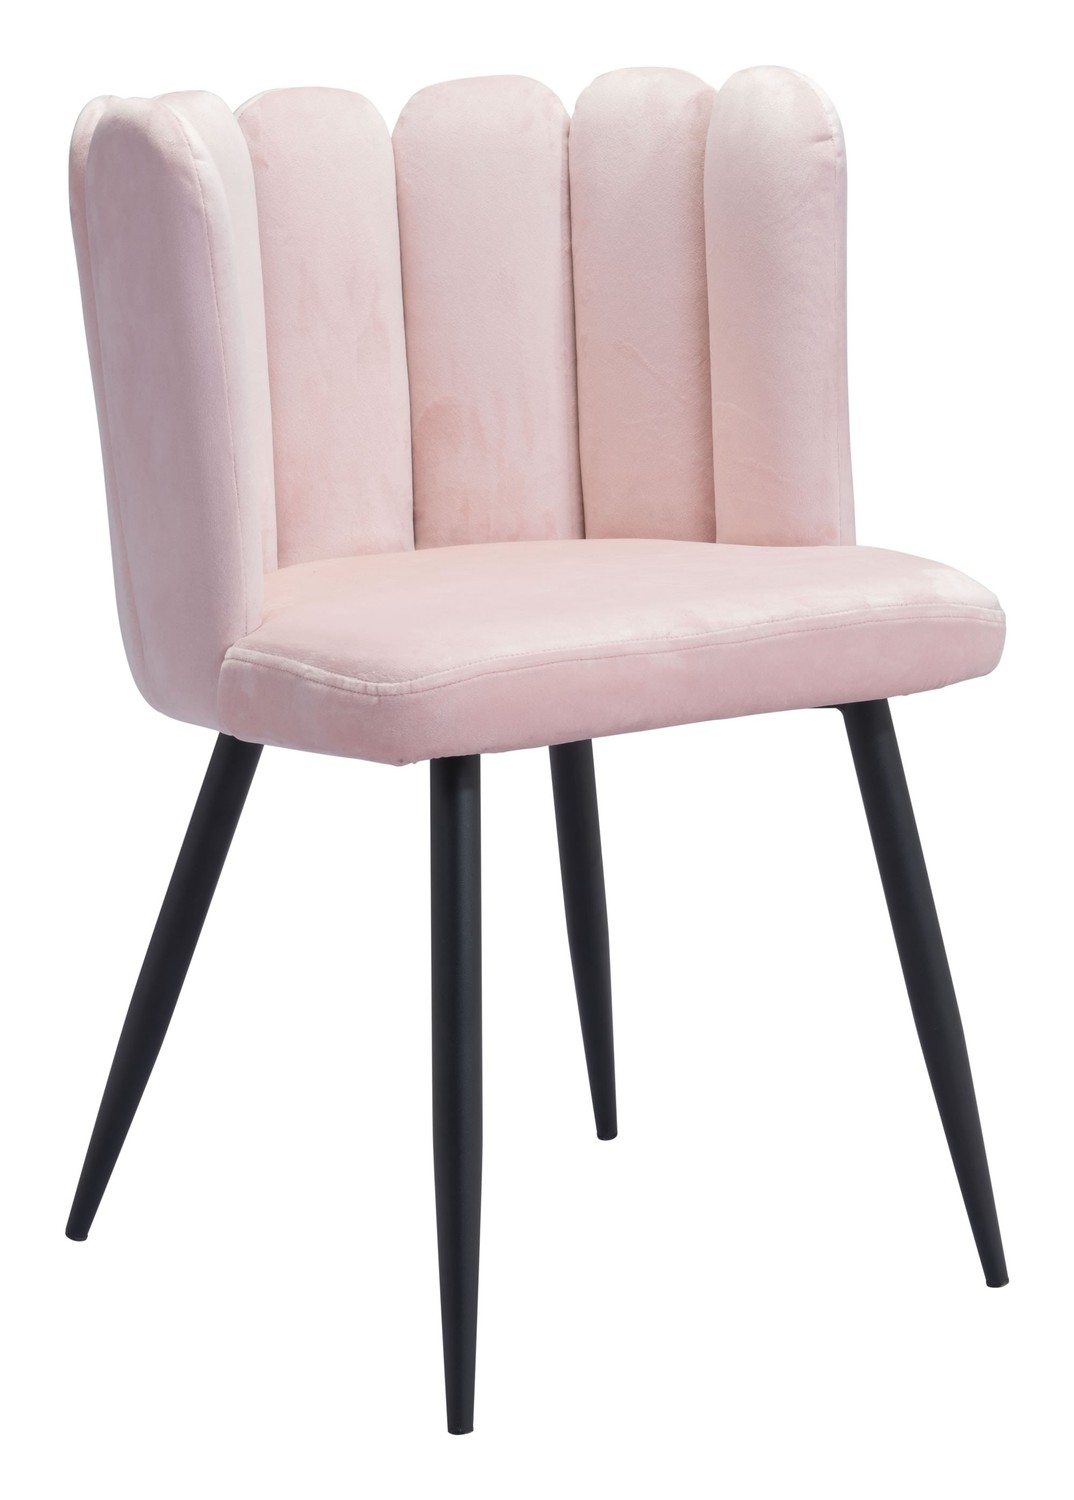 Glam Scallop Pink Velvet and Gold Dining or Accent Chairs Set of 2